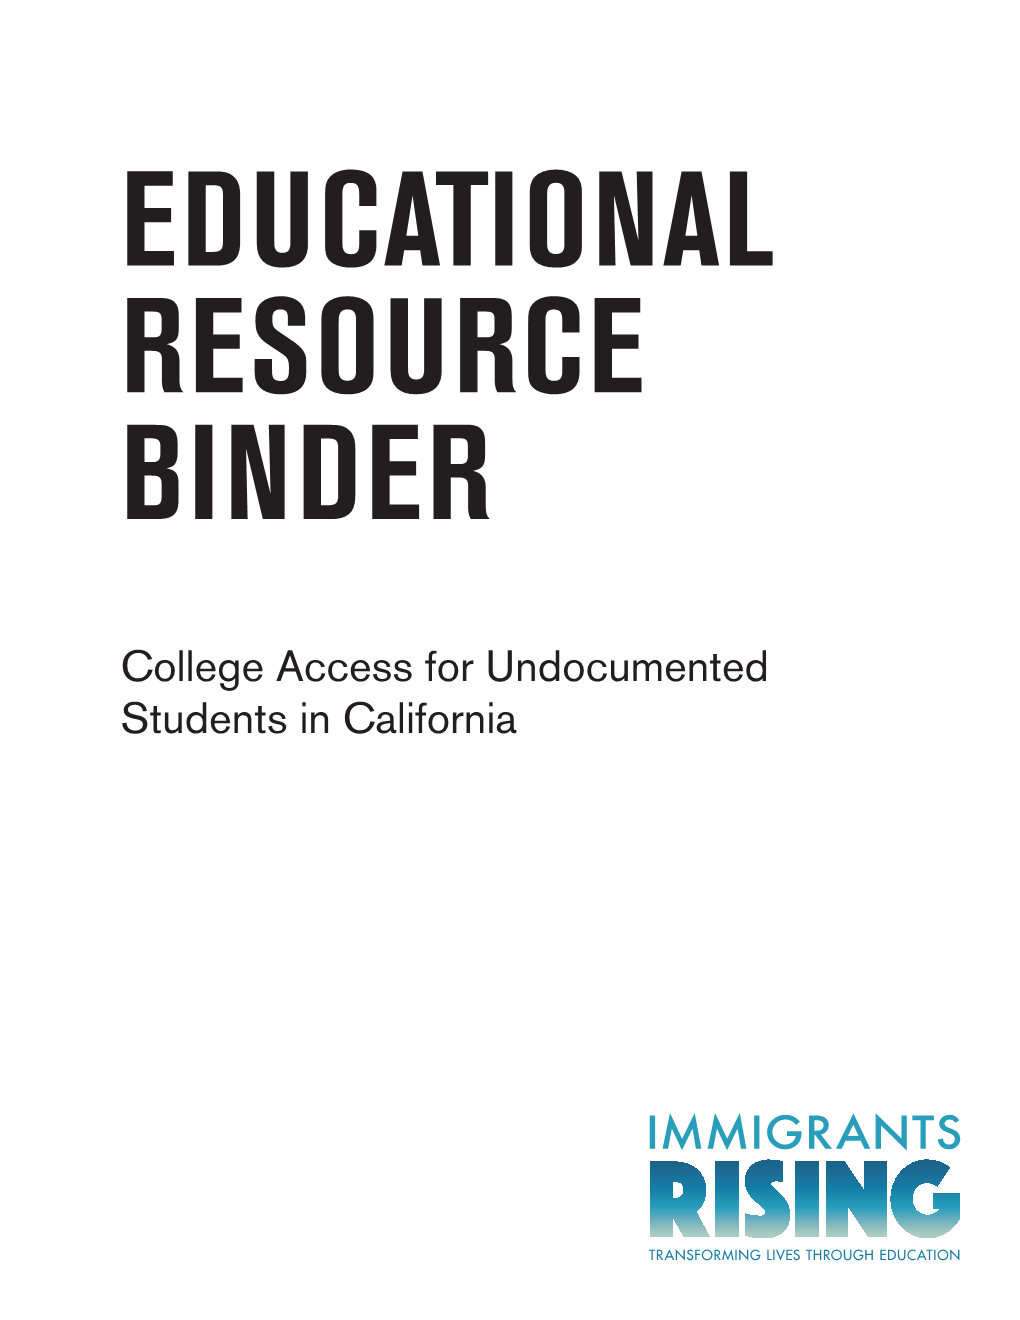 Appendix 8.2.08 Selections from Immigrants Rising Educational